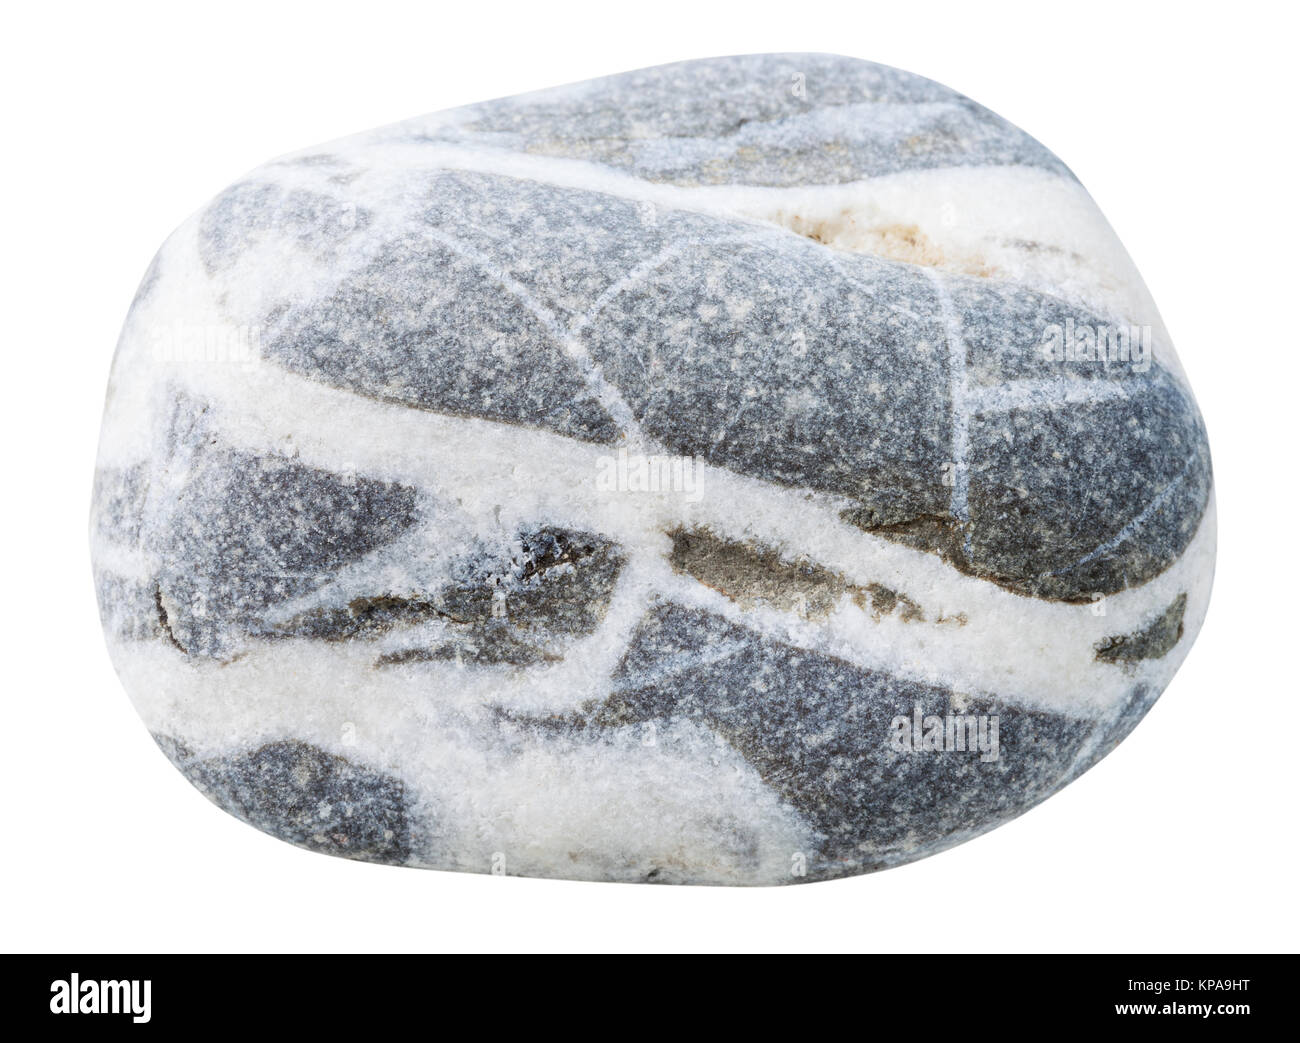 pebble from gneiss rock natural mineral stone Stock Photo